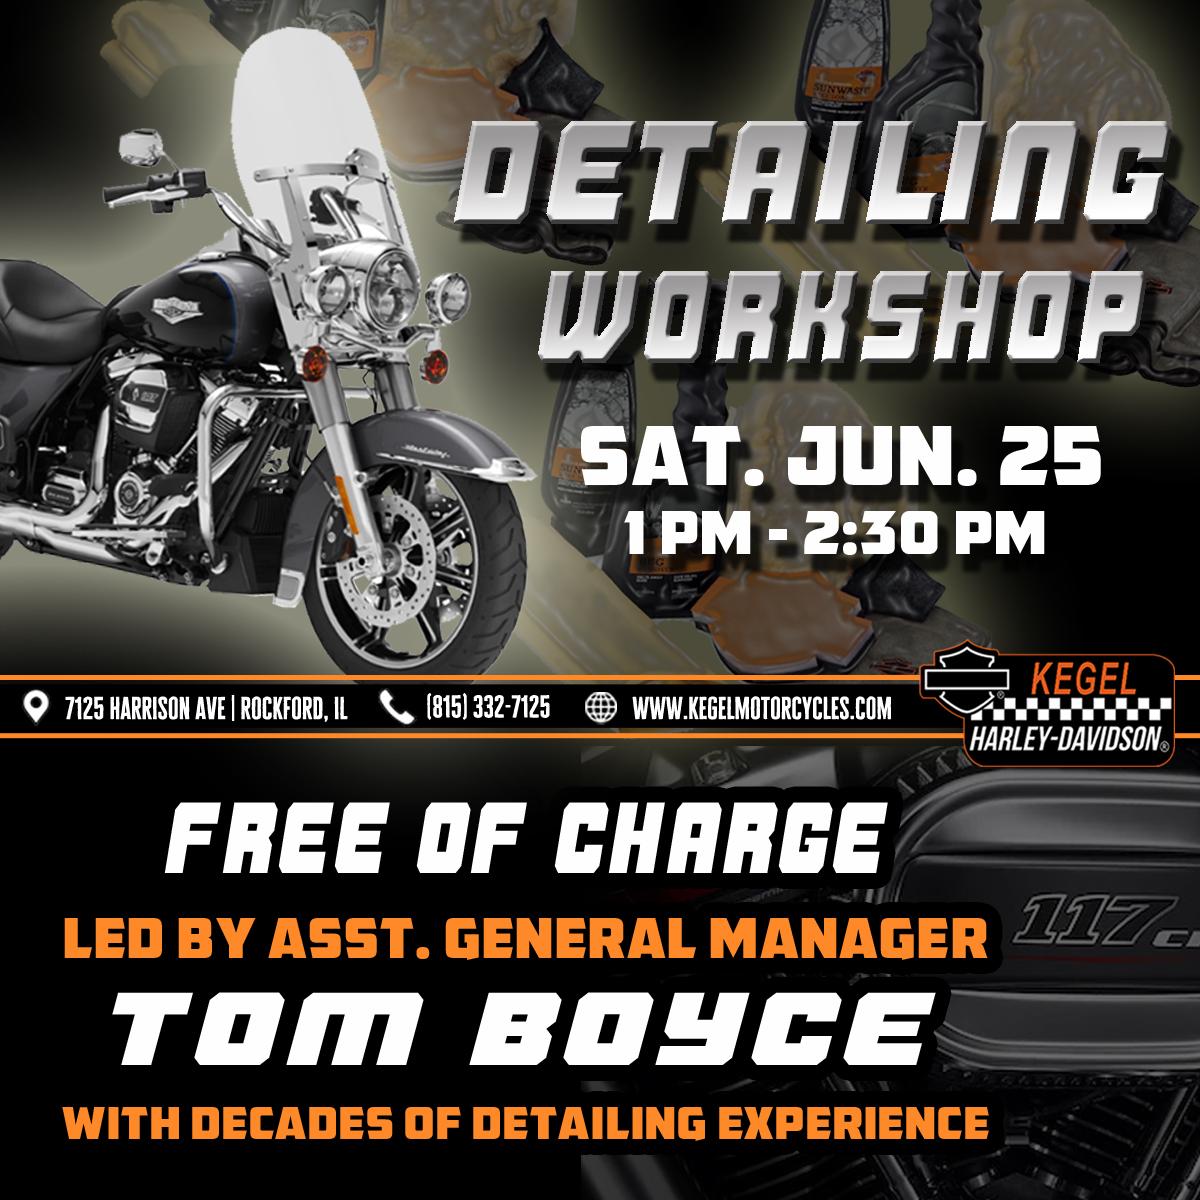 Our Detailing Workshop is TOMORROW!

Join Assistant GM Tom Boyce on Saturday, June 25th for this FREE EVENT as he shares his trade secrets and other tips &amp; tricks for keeping your bike in tip-top shape!

#kegelhd #harleydavidson #harleydavidsonworkshops #detailing #bikedetailing 